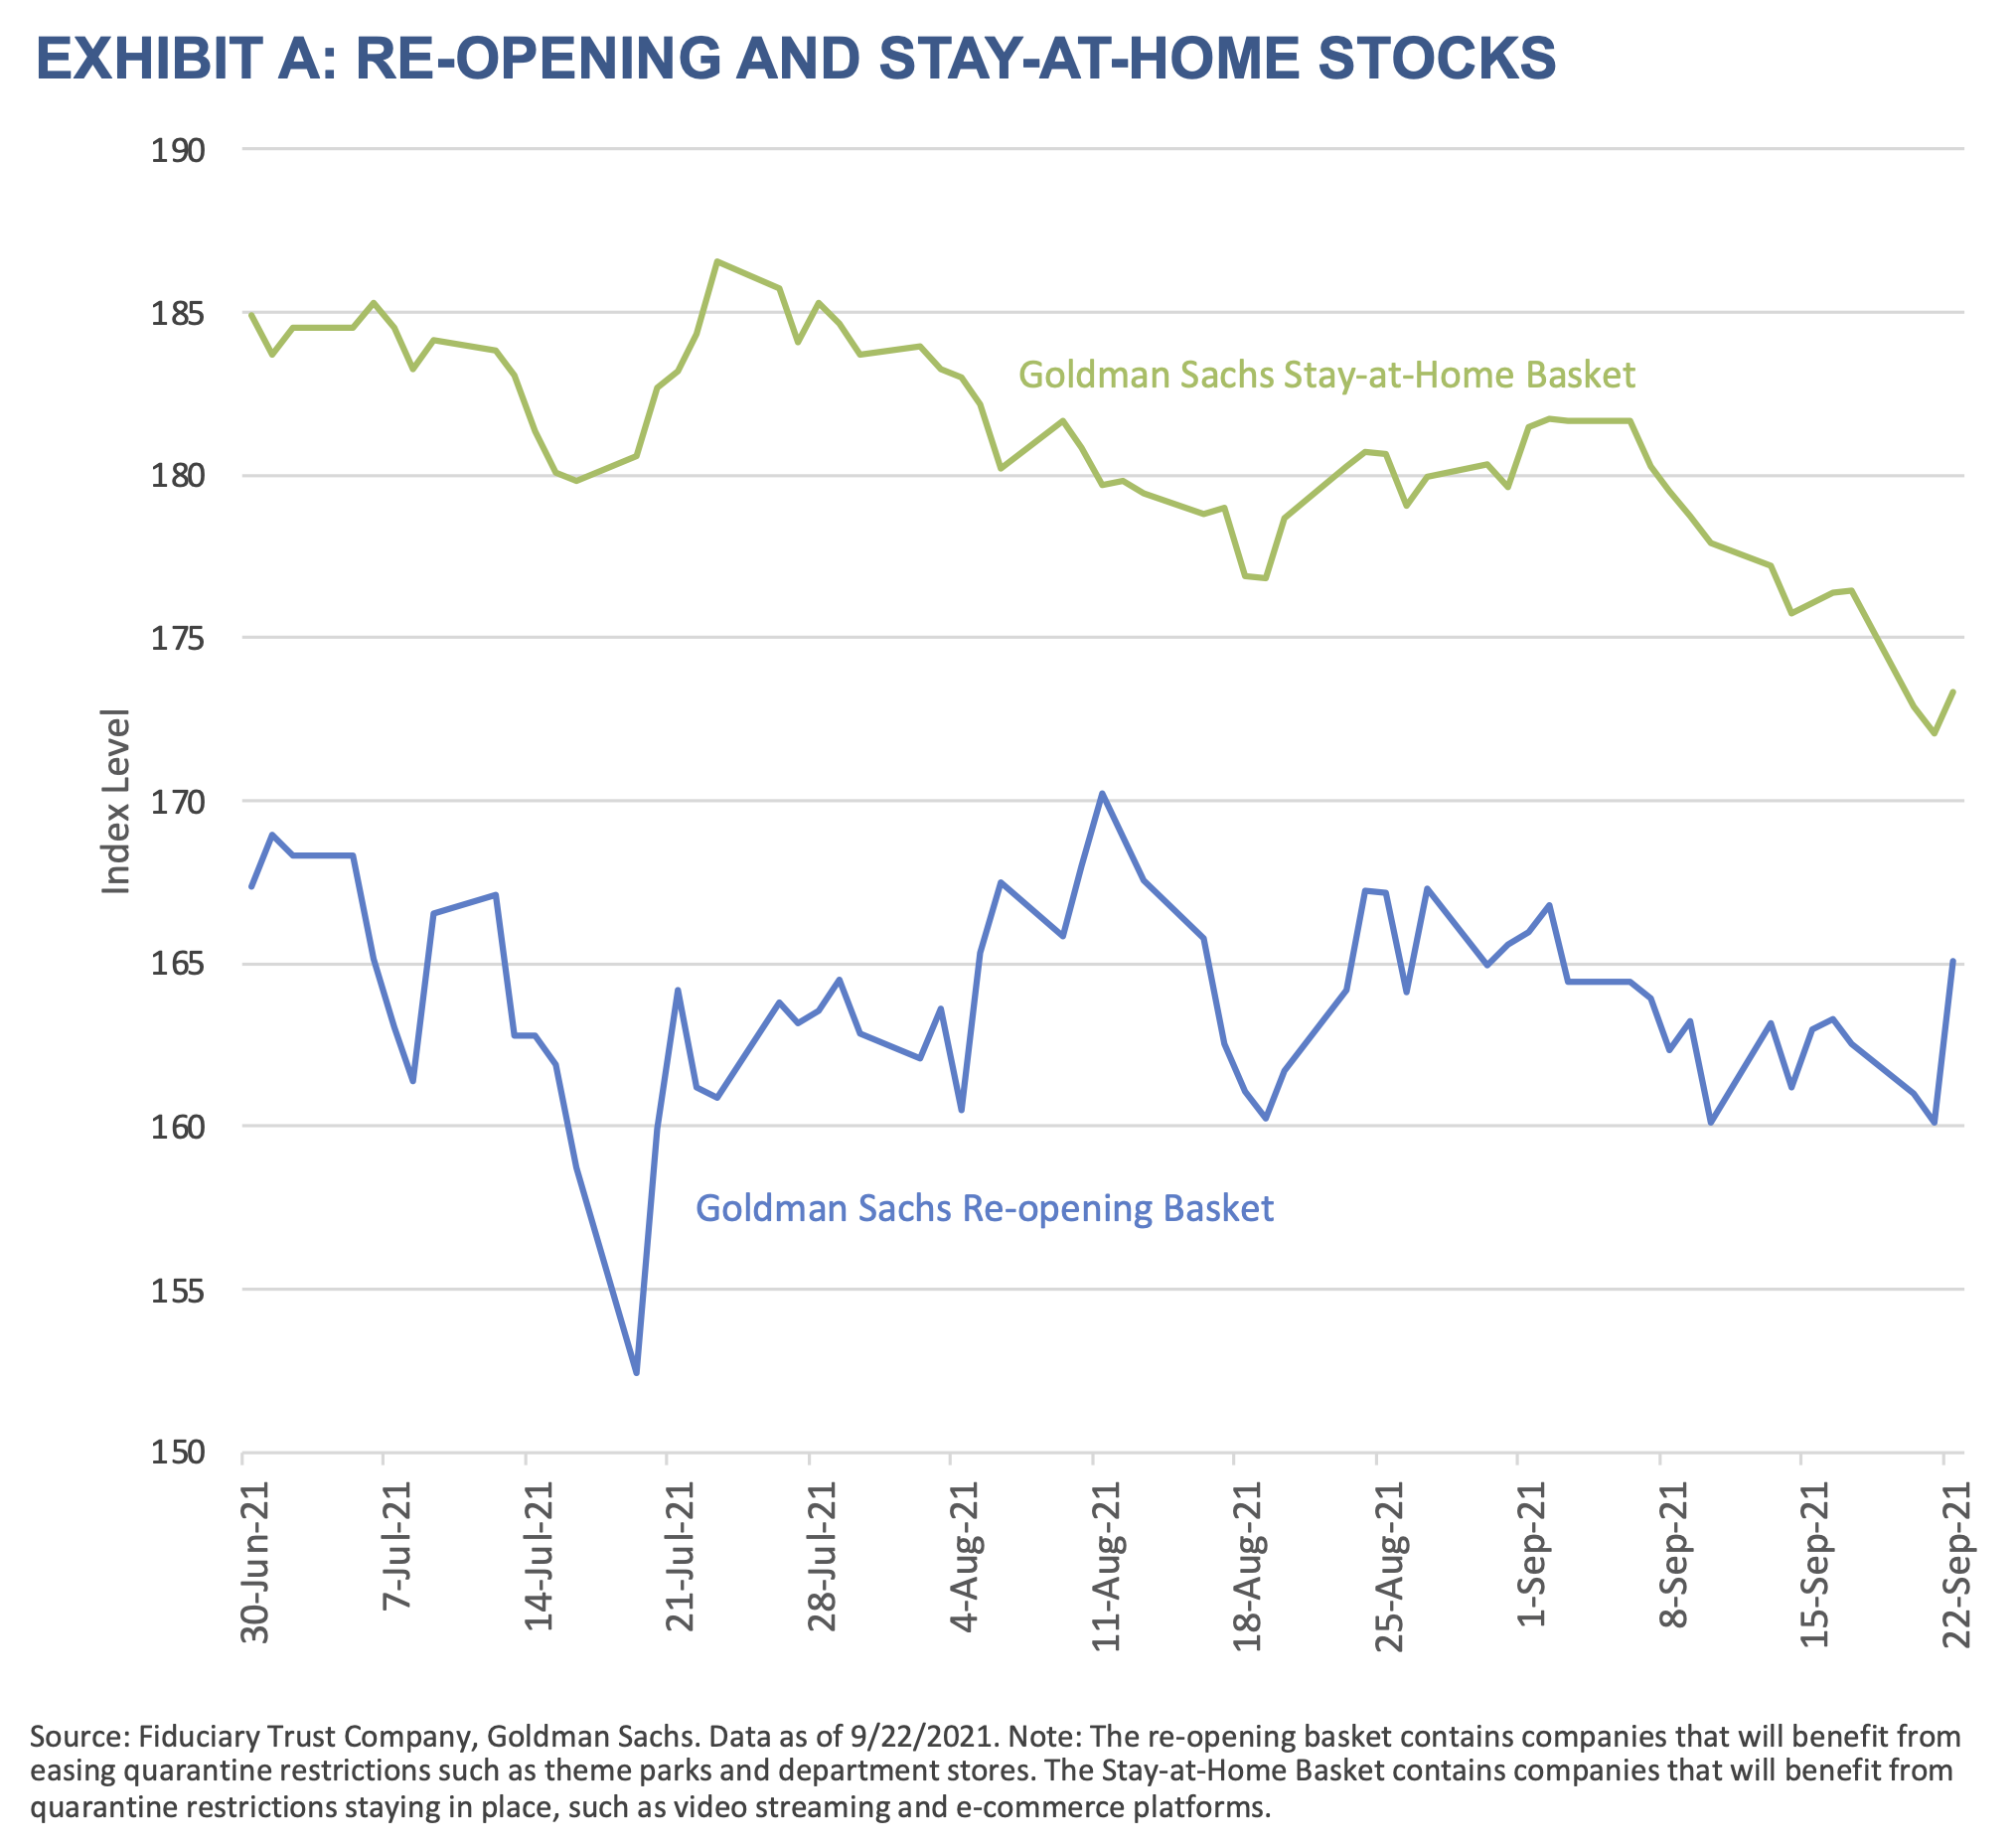 2021 Q4 Outlook-Exhibit A-Re-opening and Stay-At-Home Stocks